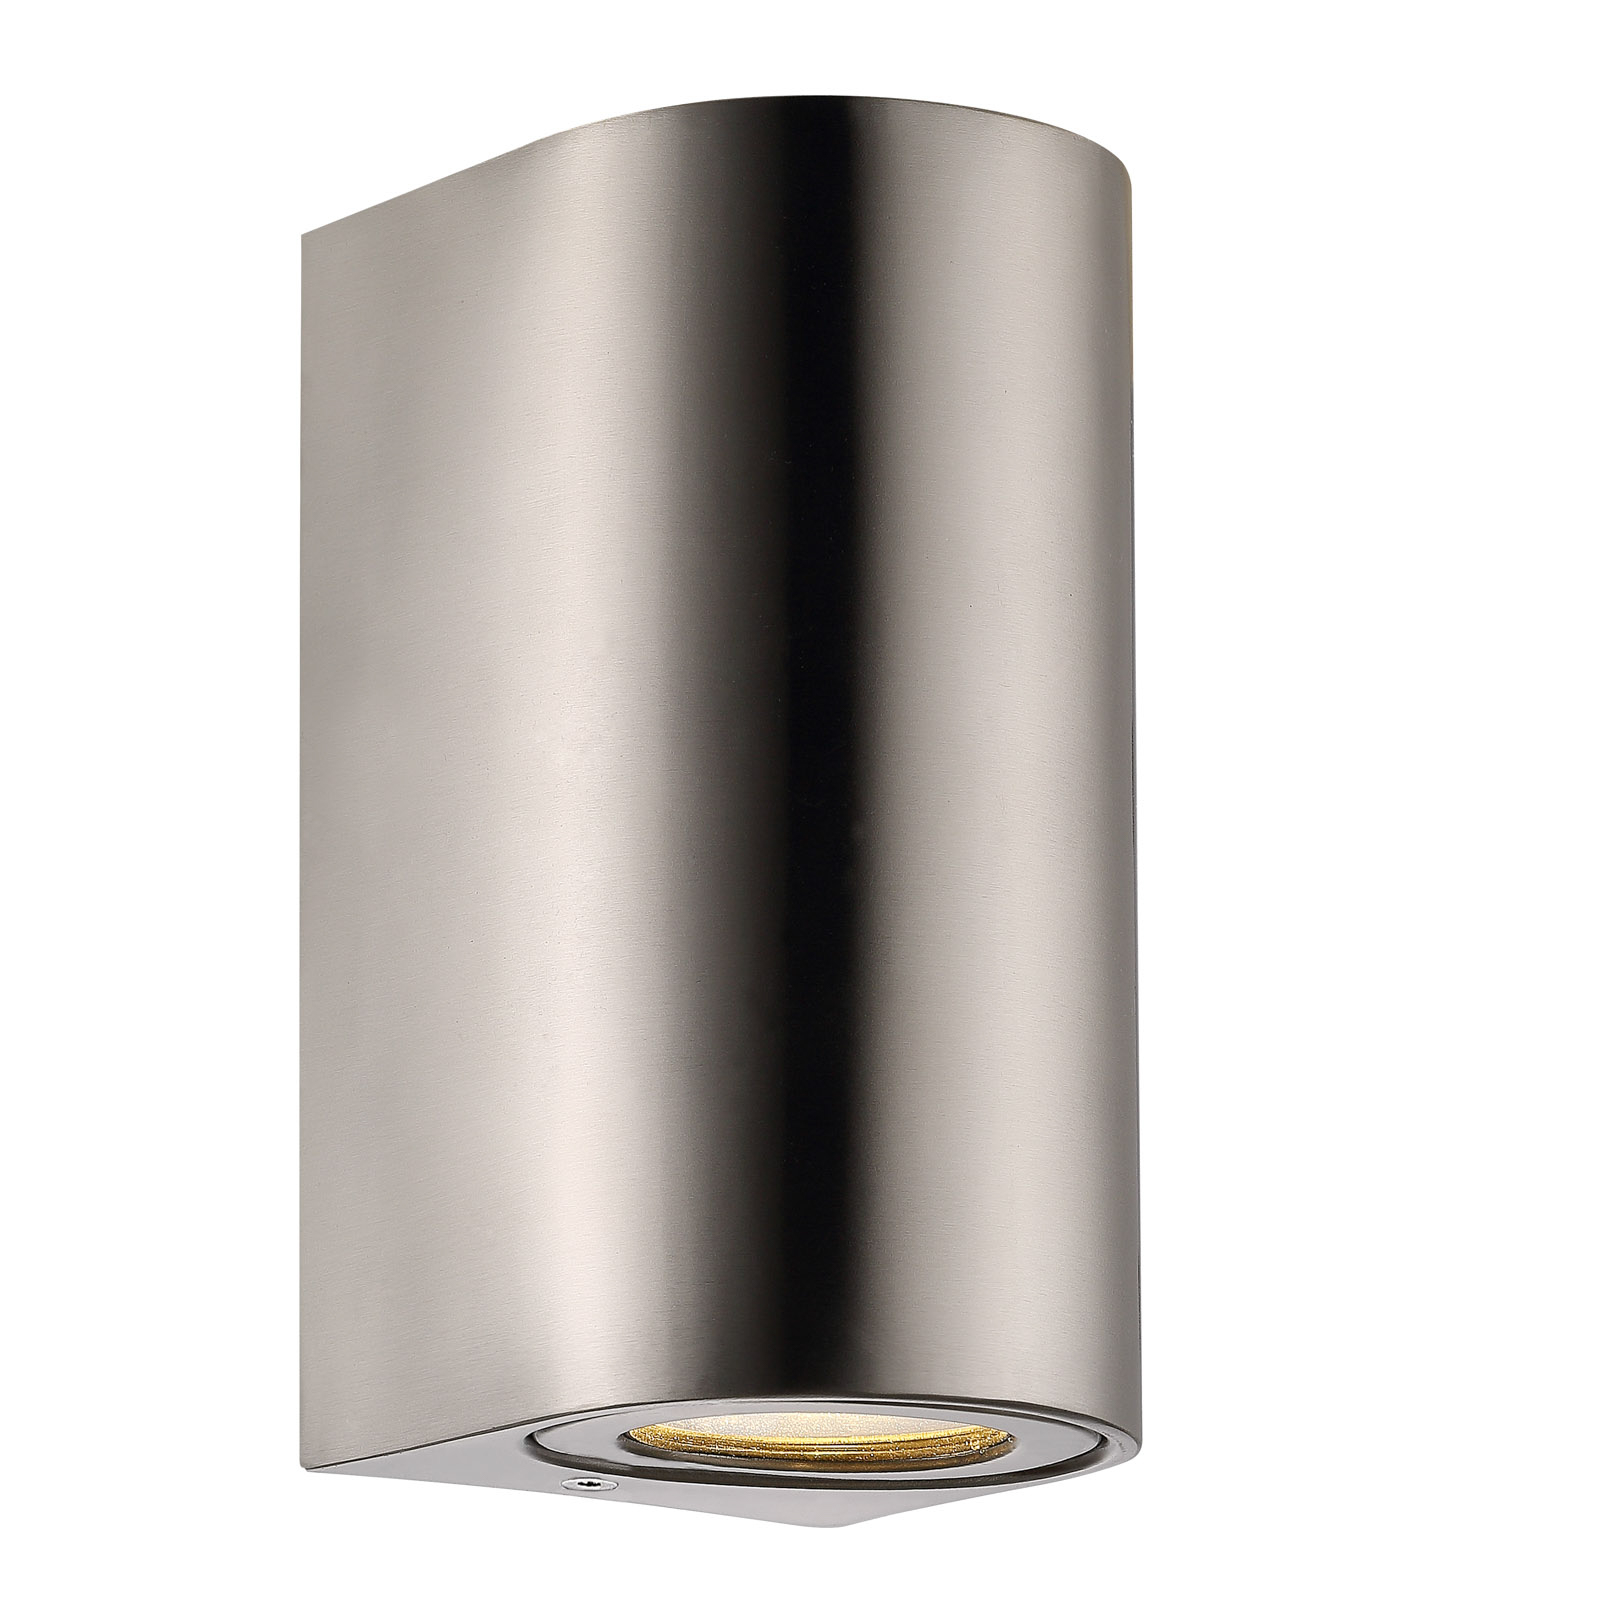 Canto Maxi 2 outdoor wall light, stainless steel